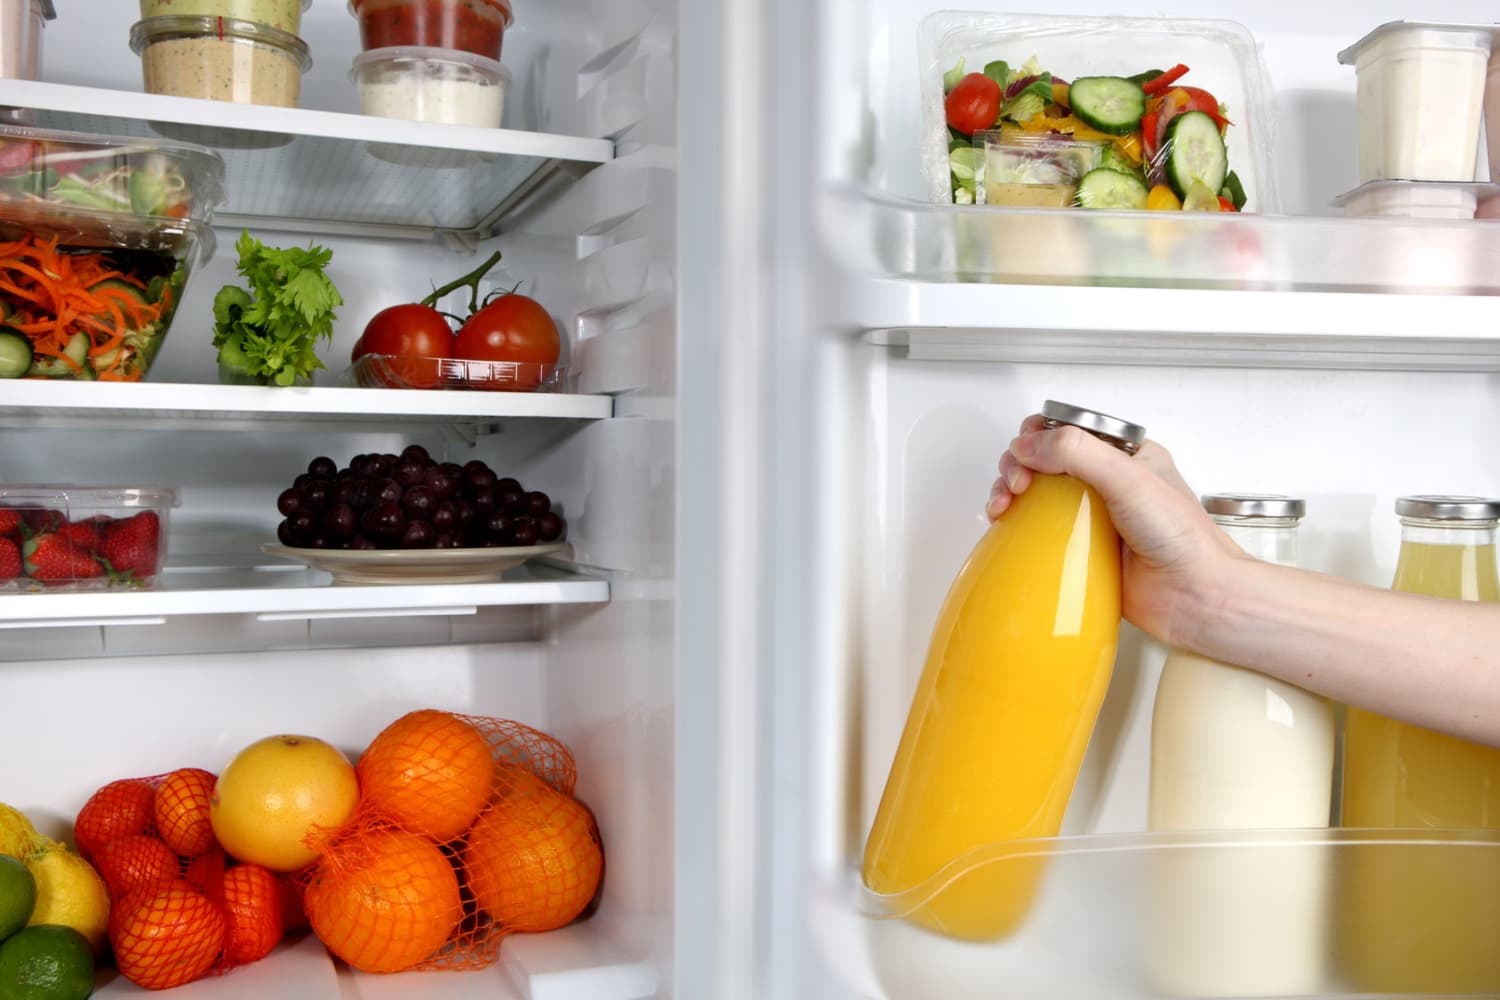 6 Organizers That’ll Make Your Fridge a Million Occasions Higher